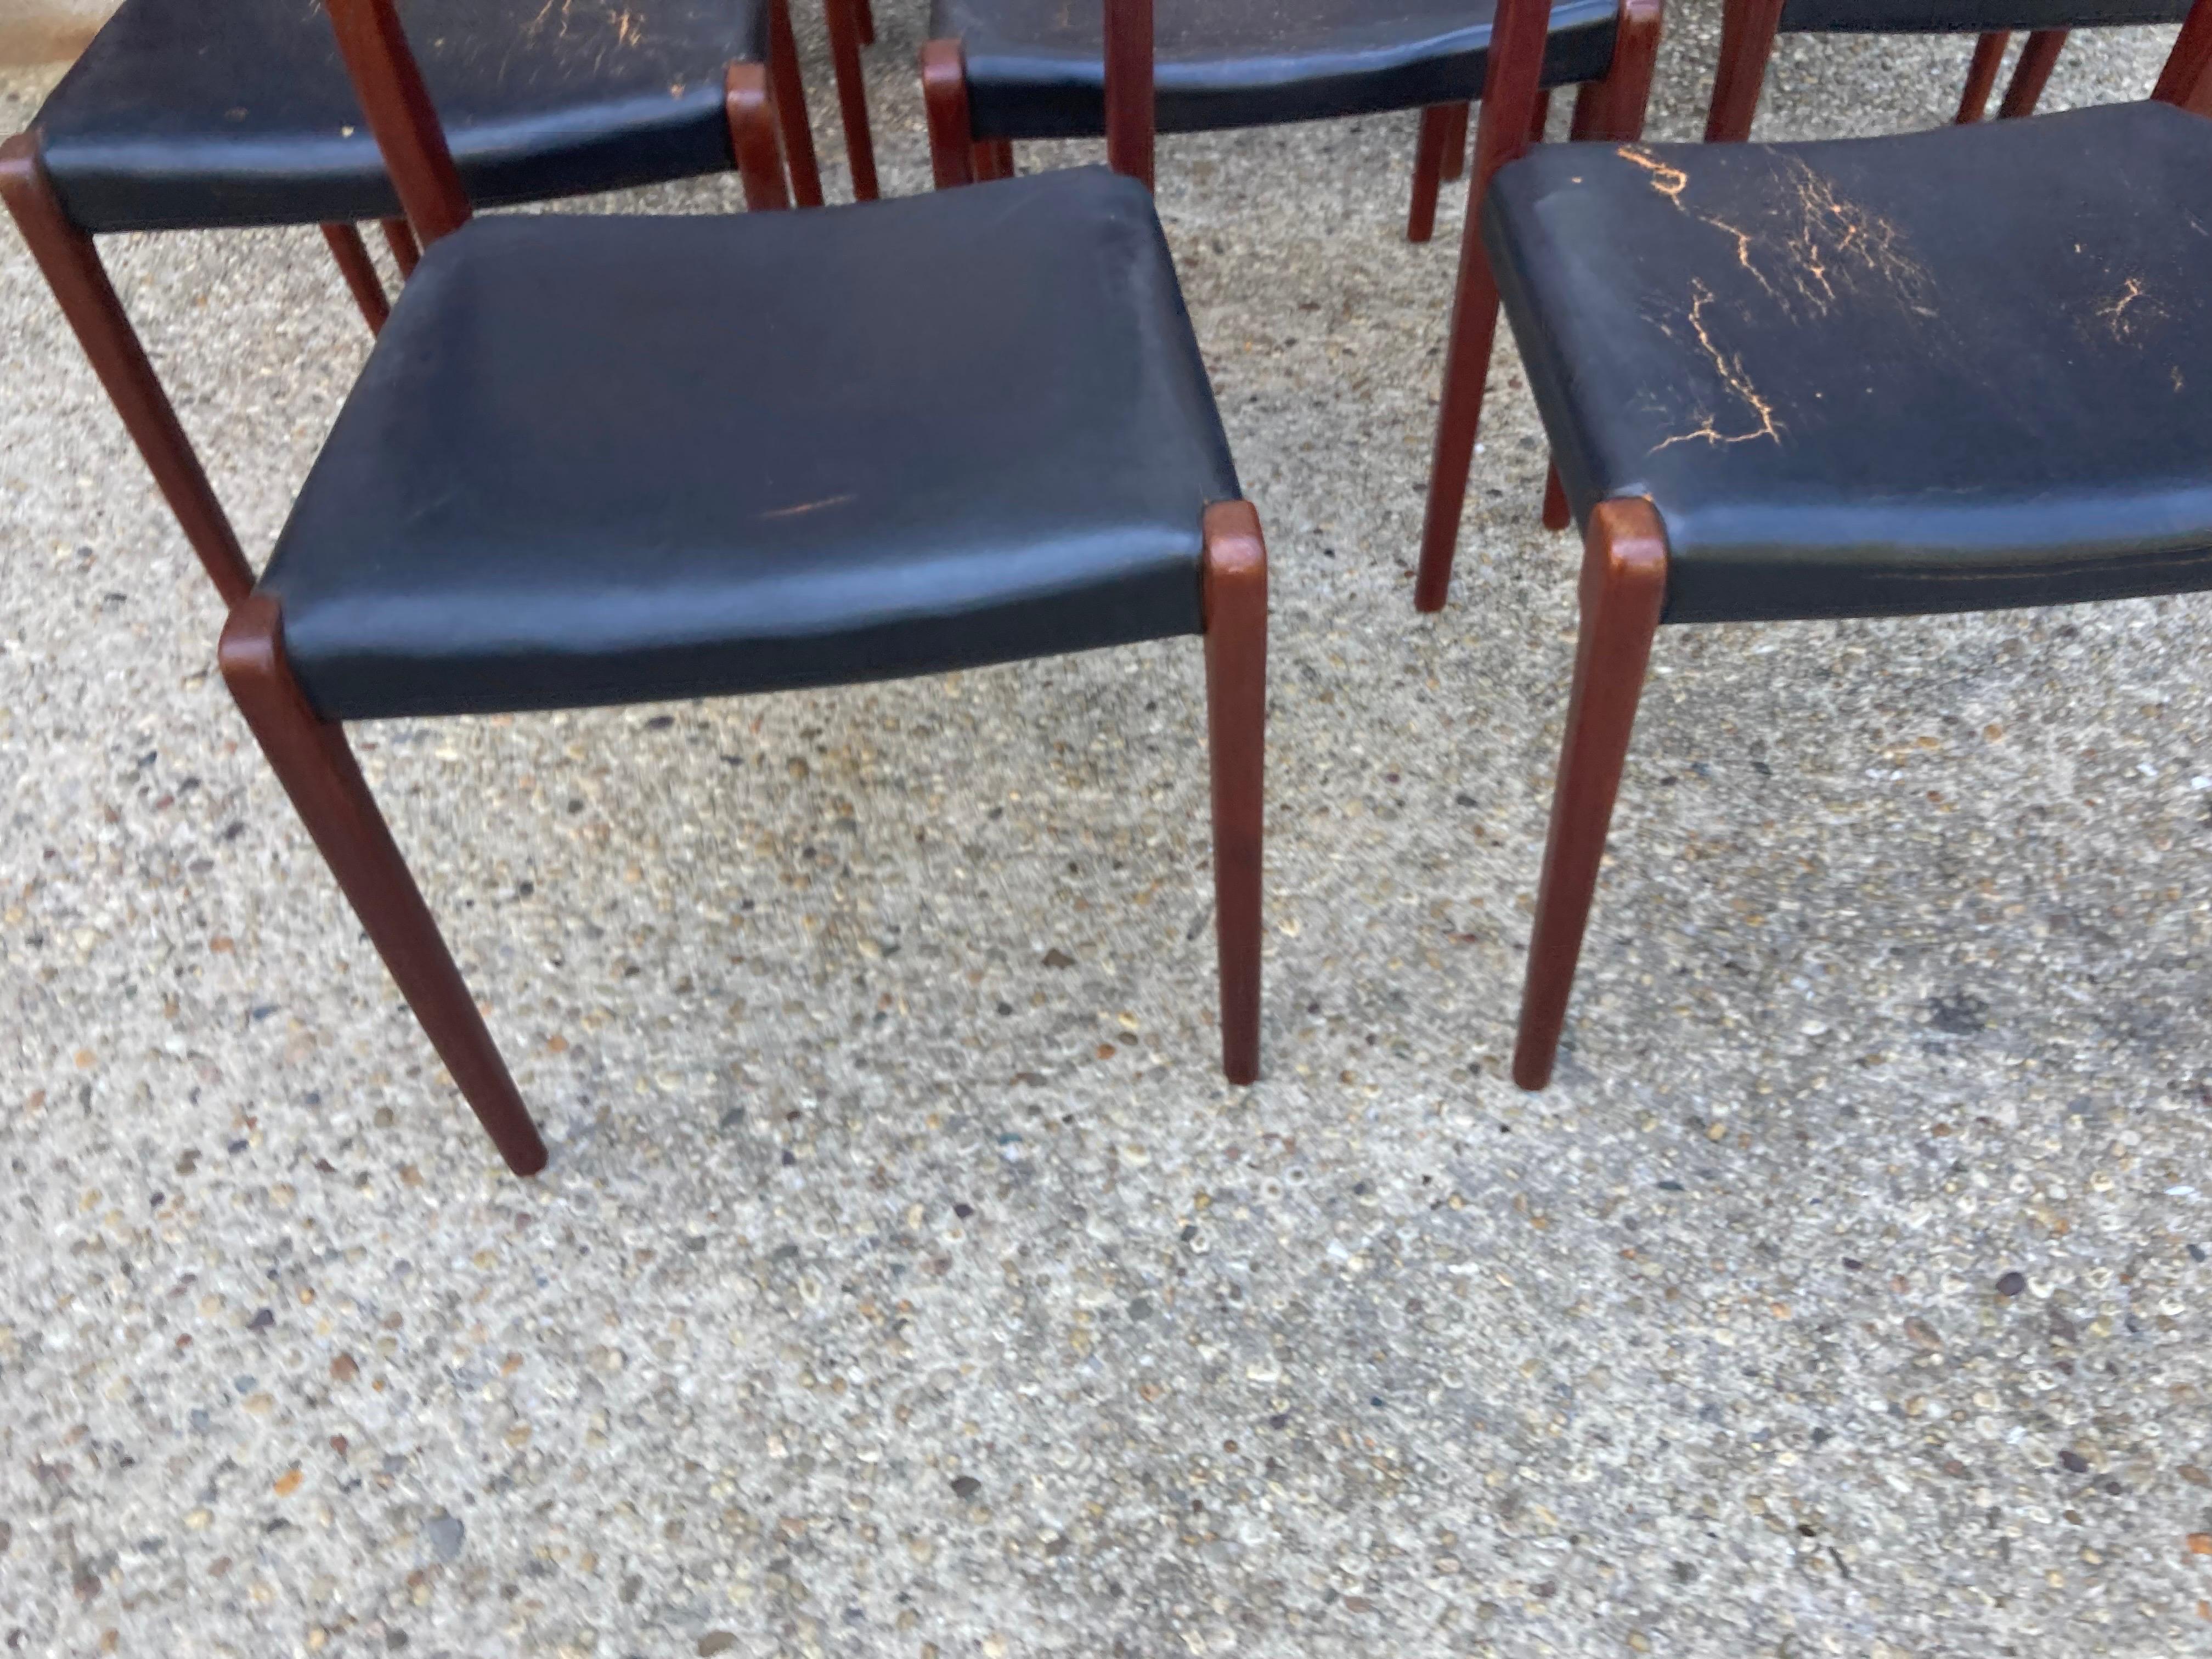 A great set of 8 teak Niels Moller no.71 dining chairs in very good condition but leather seats would need replacement with your own fabric/material.